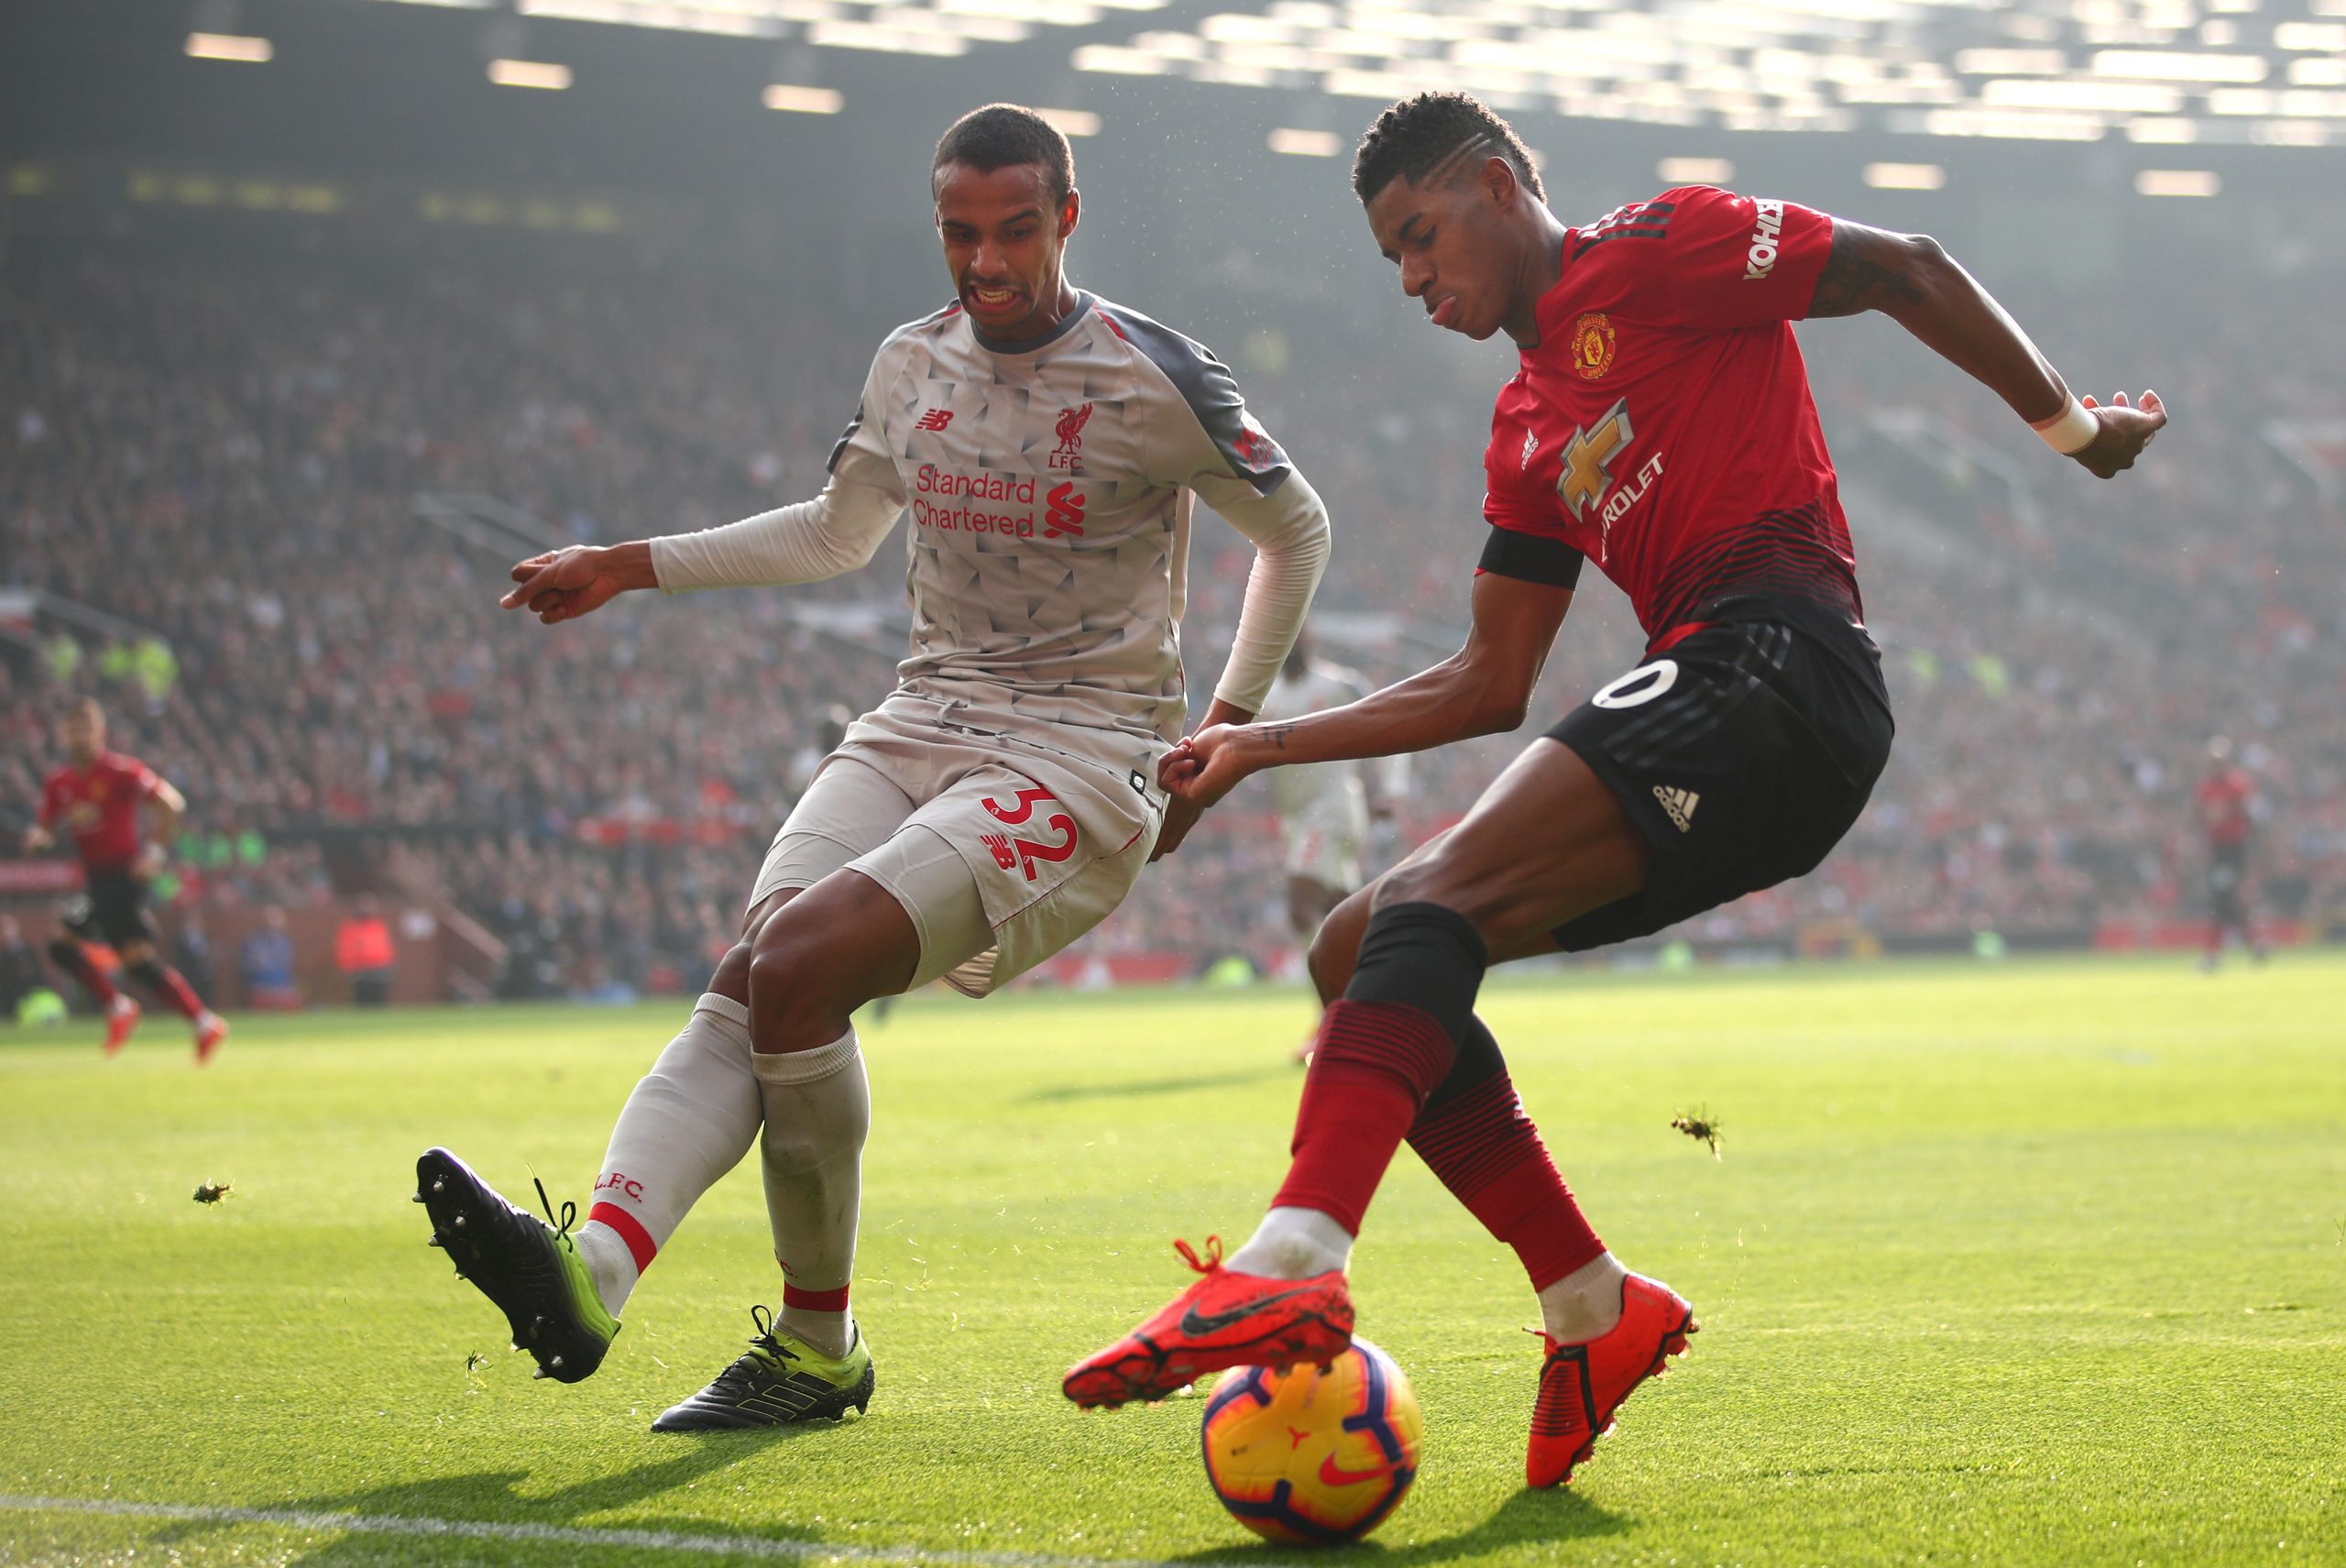 Joel Matip is set to miss the game against Manchester United.